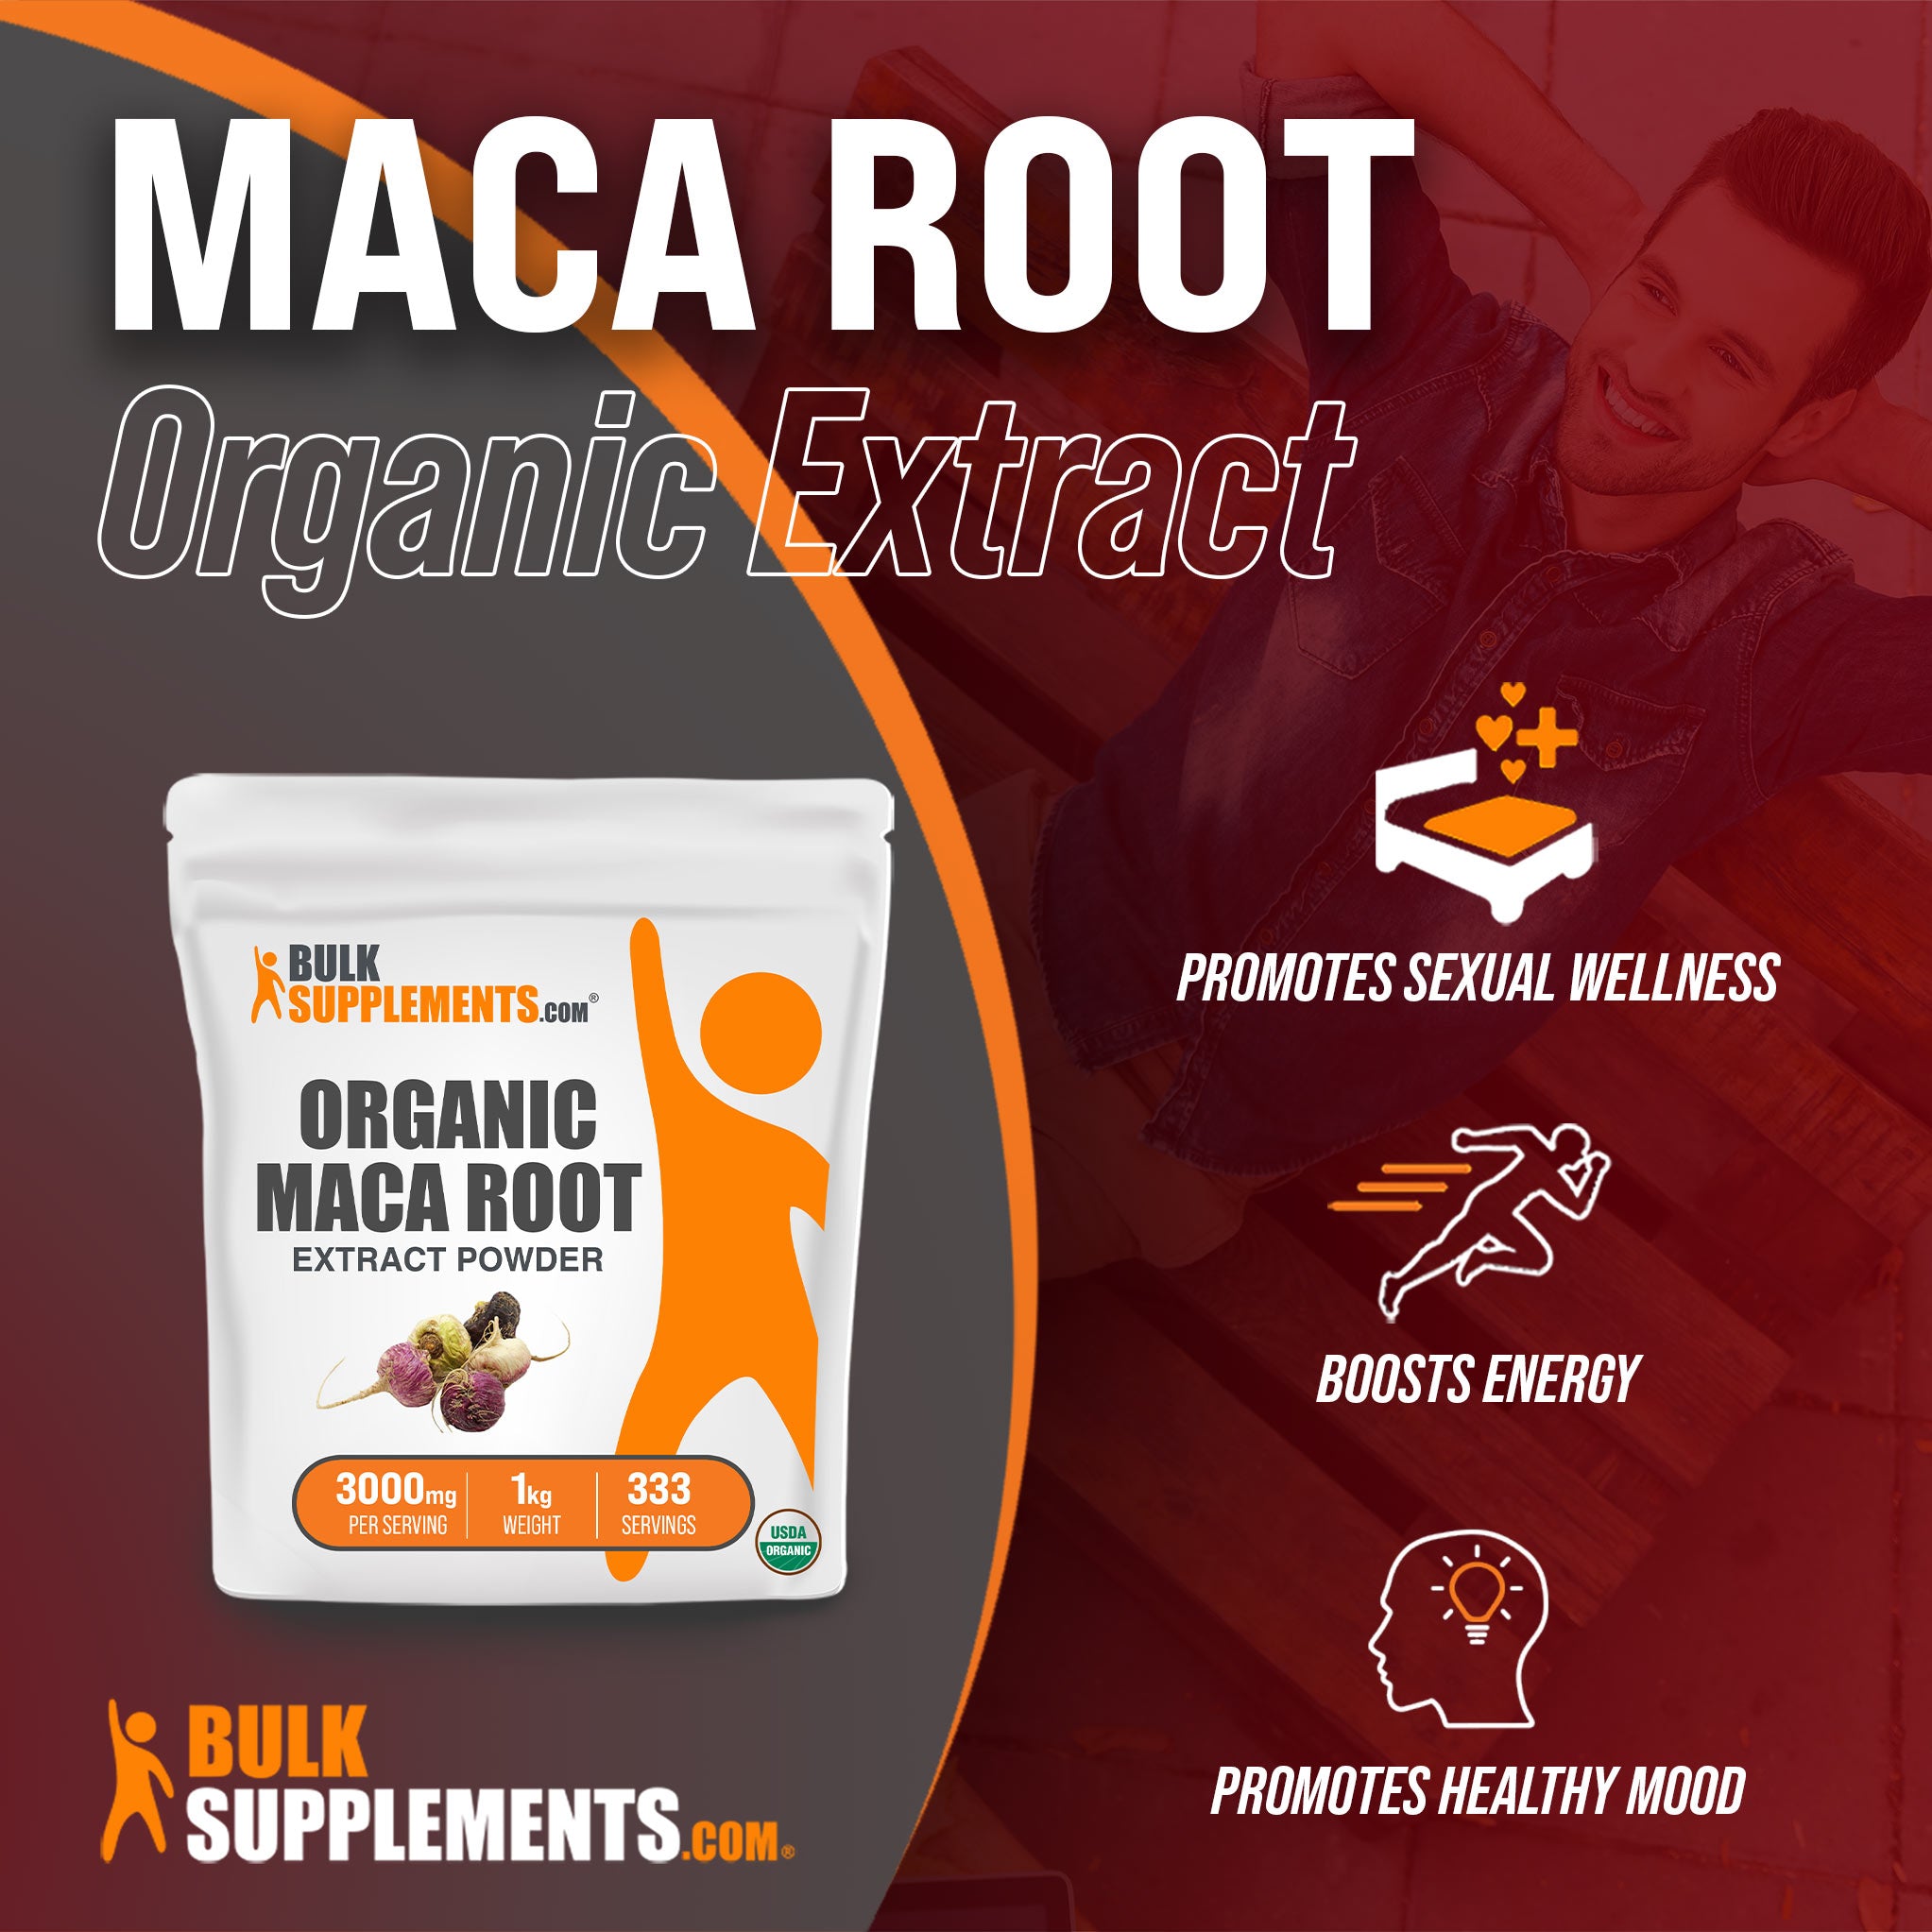 Benefits of Maca Root Extract: promotes sexual wellness, boosts energy, promotes healthy mood